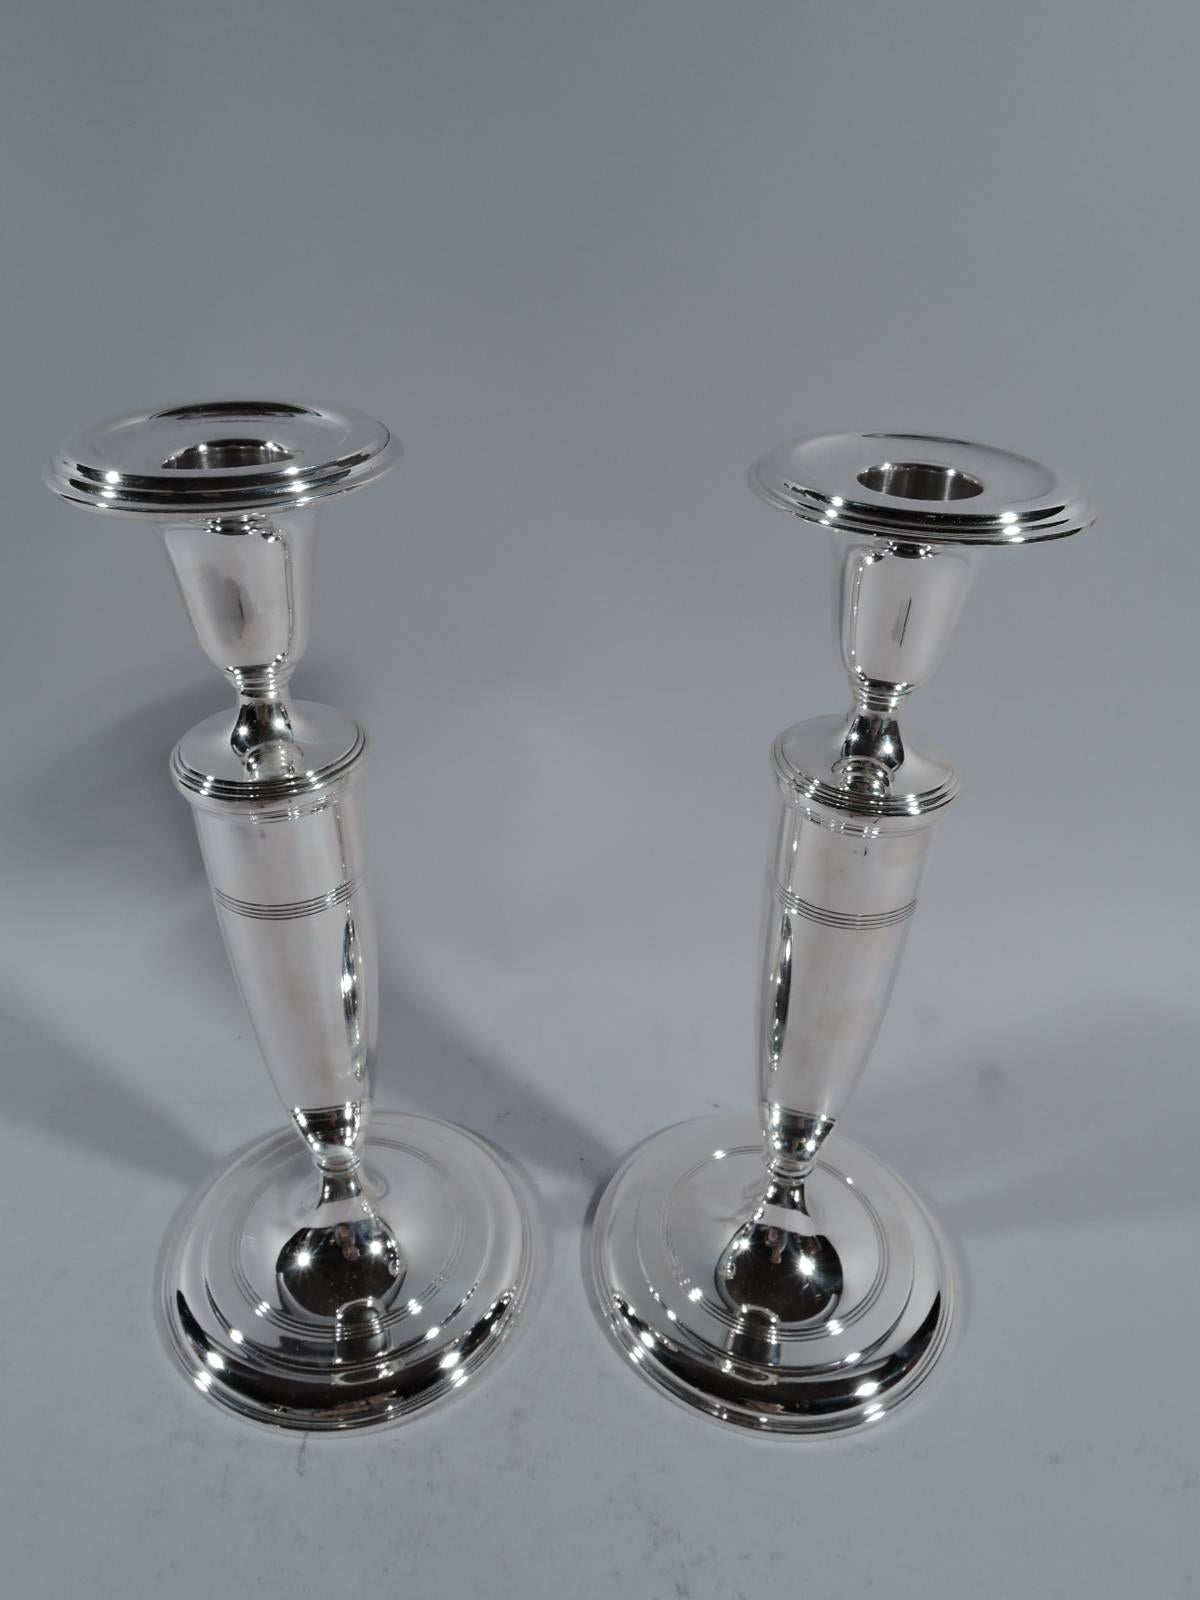 Pair of Classic sterling silver candlesticks. Made by Tiffany & Co. in New York, circa 1922. Tapering shaft on raised foot. Urn socket with detachable bobeche. Reeded bands on shaft and foot. Hallmark includes pattern no. 20132 (first produced in